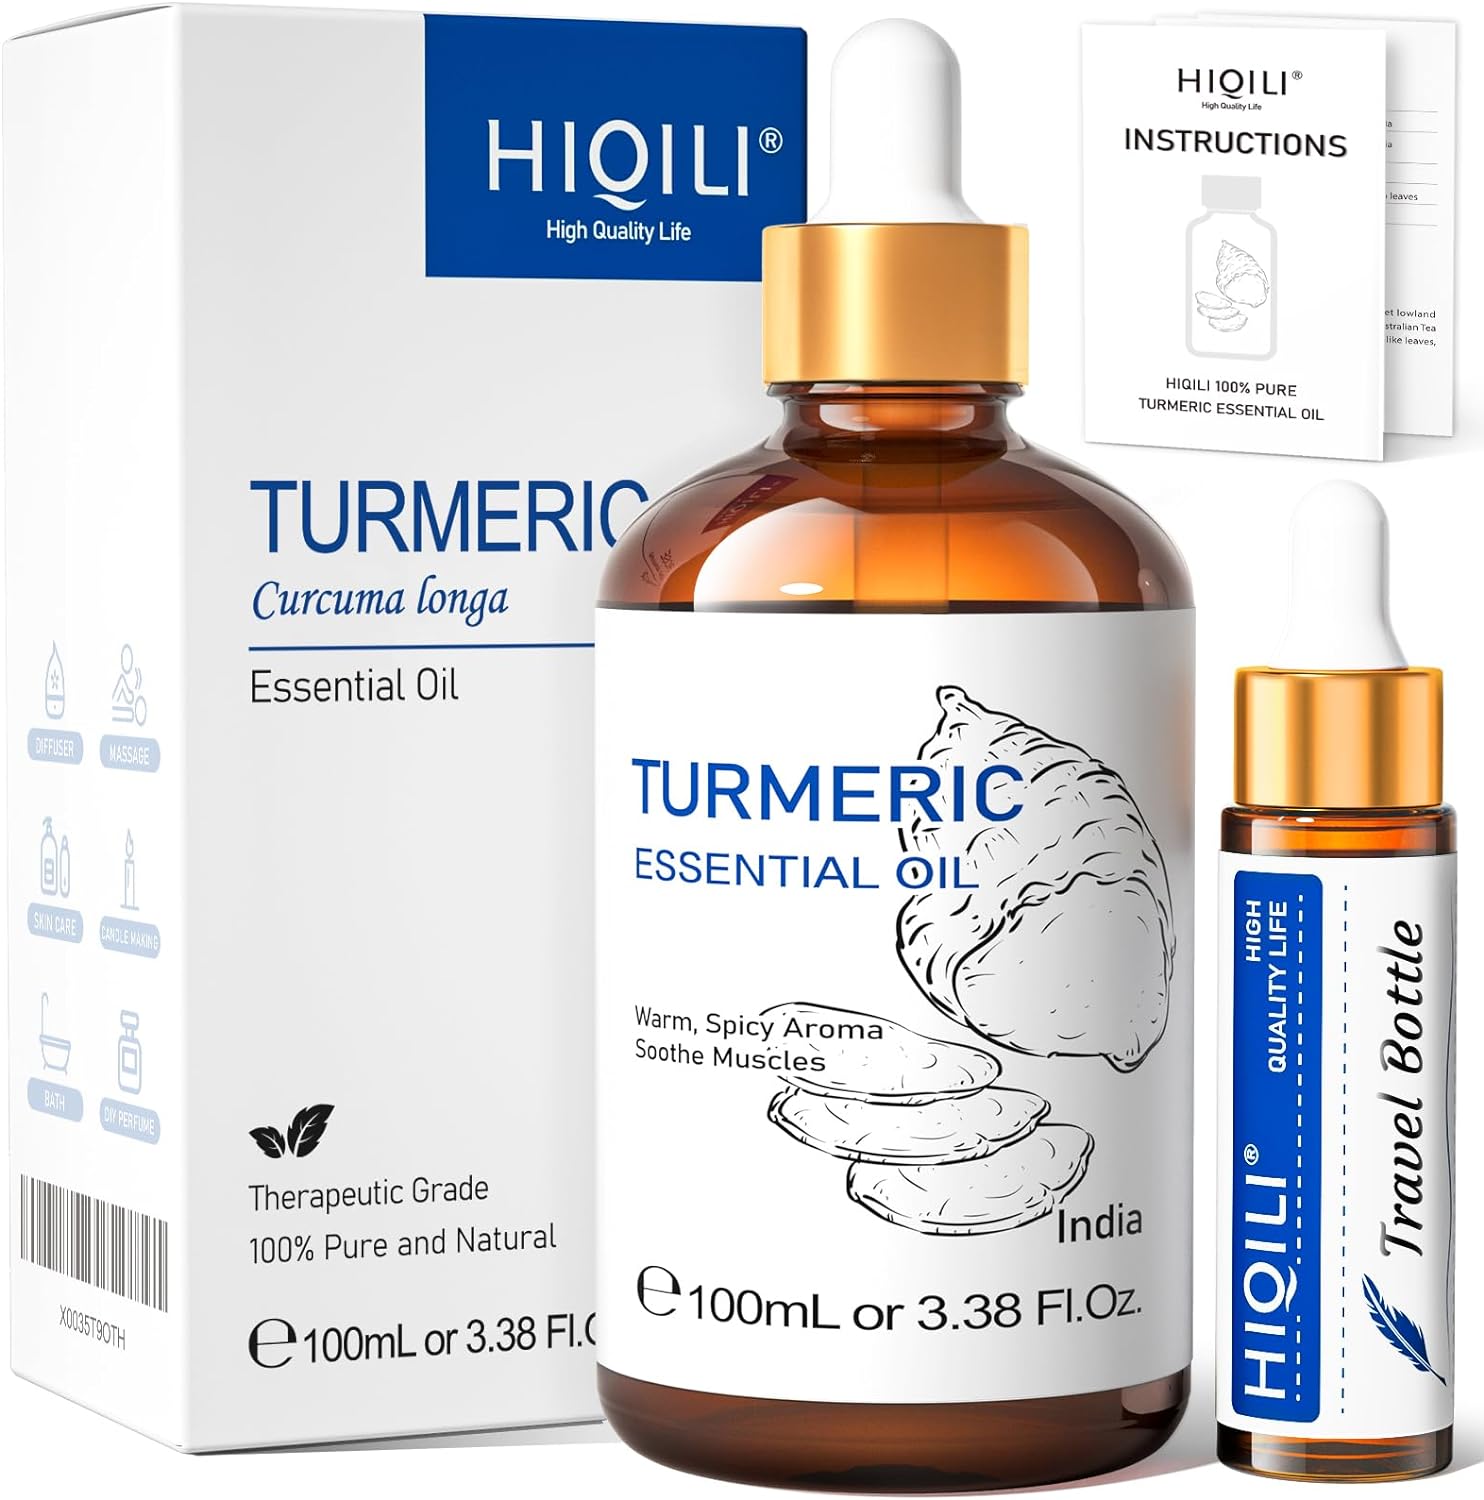 HIQILI Turmeric Oil for Face Dark Spots, Face Problems,100% Pure, Use After Dilution- 3.38 Fl Oz